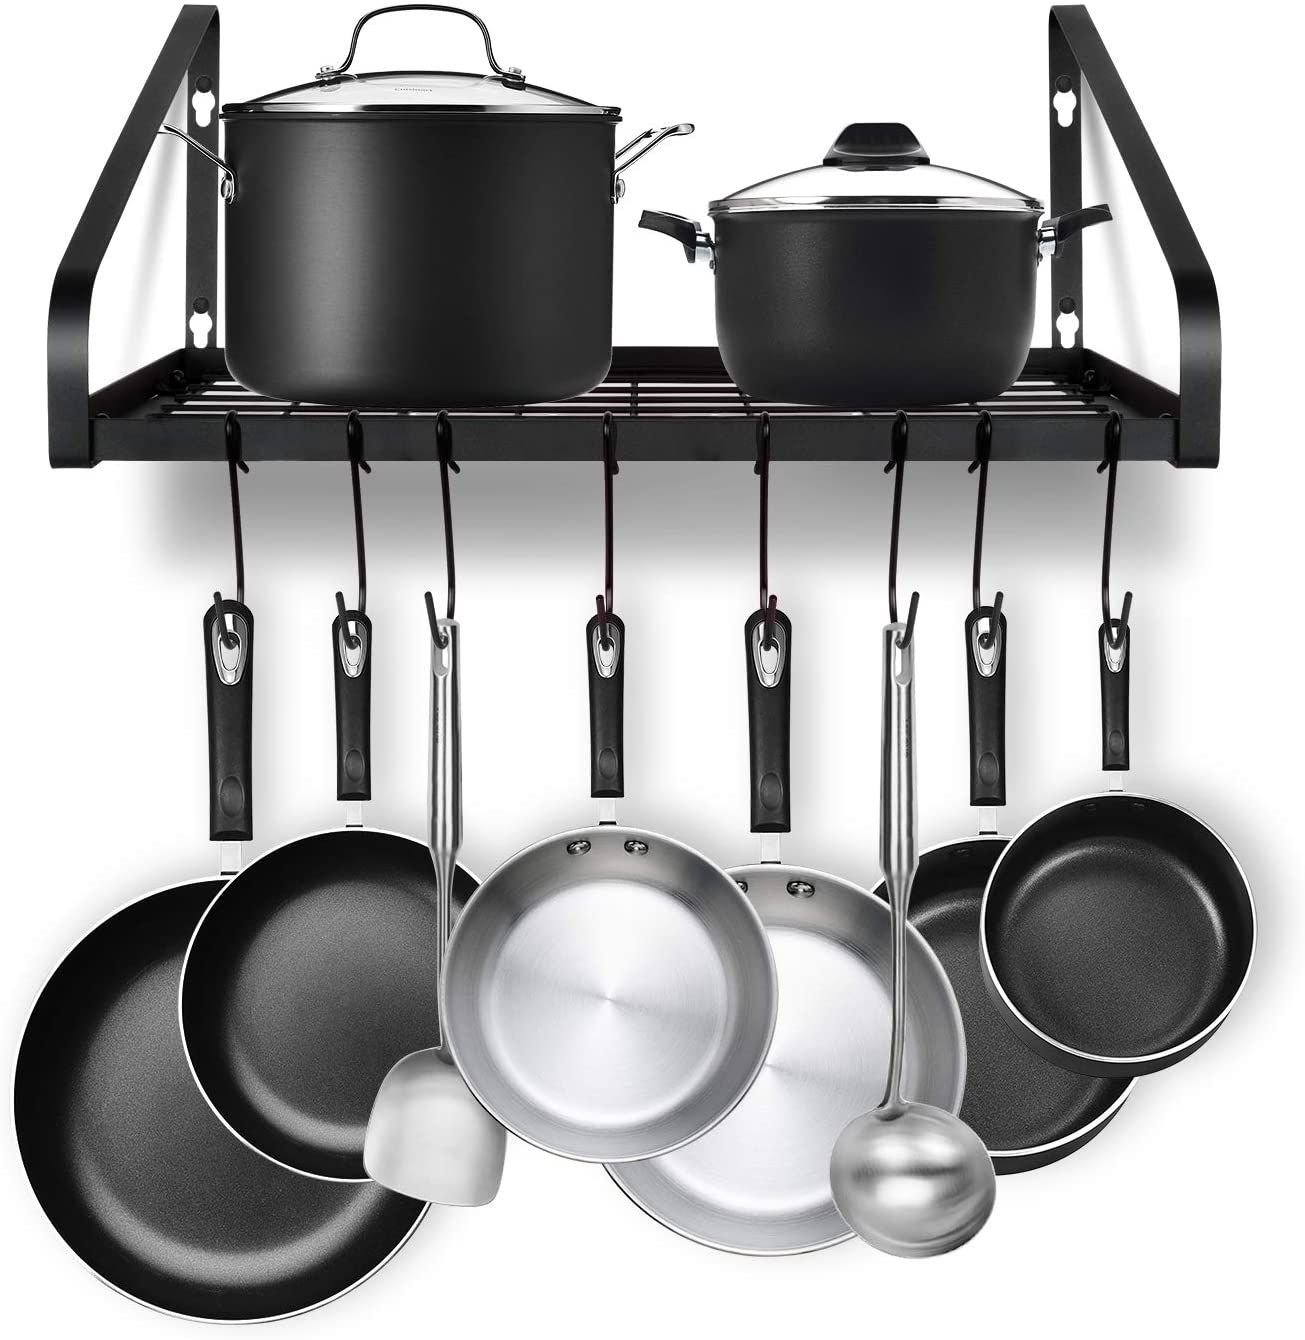 Black Height & Position Adjustable Kitchen Pot and Pan Holder with 3 DIY Methods & 8+ Pot Holders Magicfly Pot and Pan Organizer Pot Rack Organizer with a Cleaner